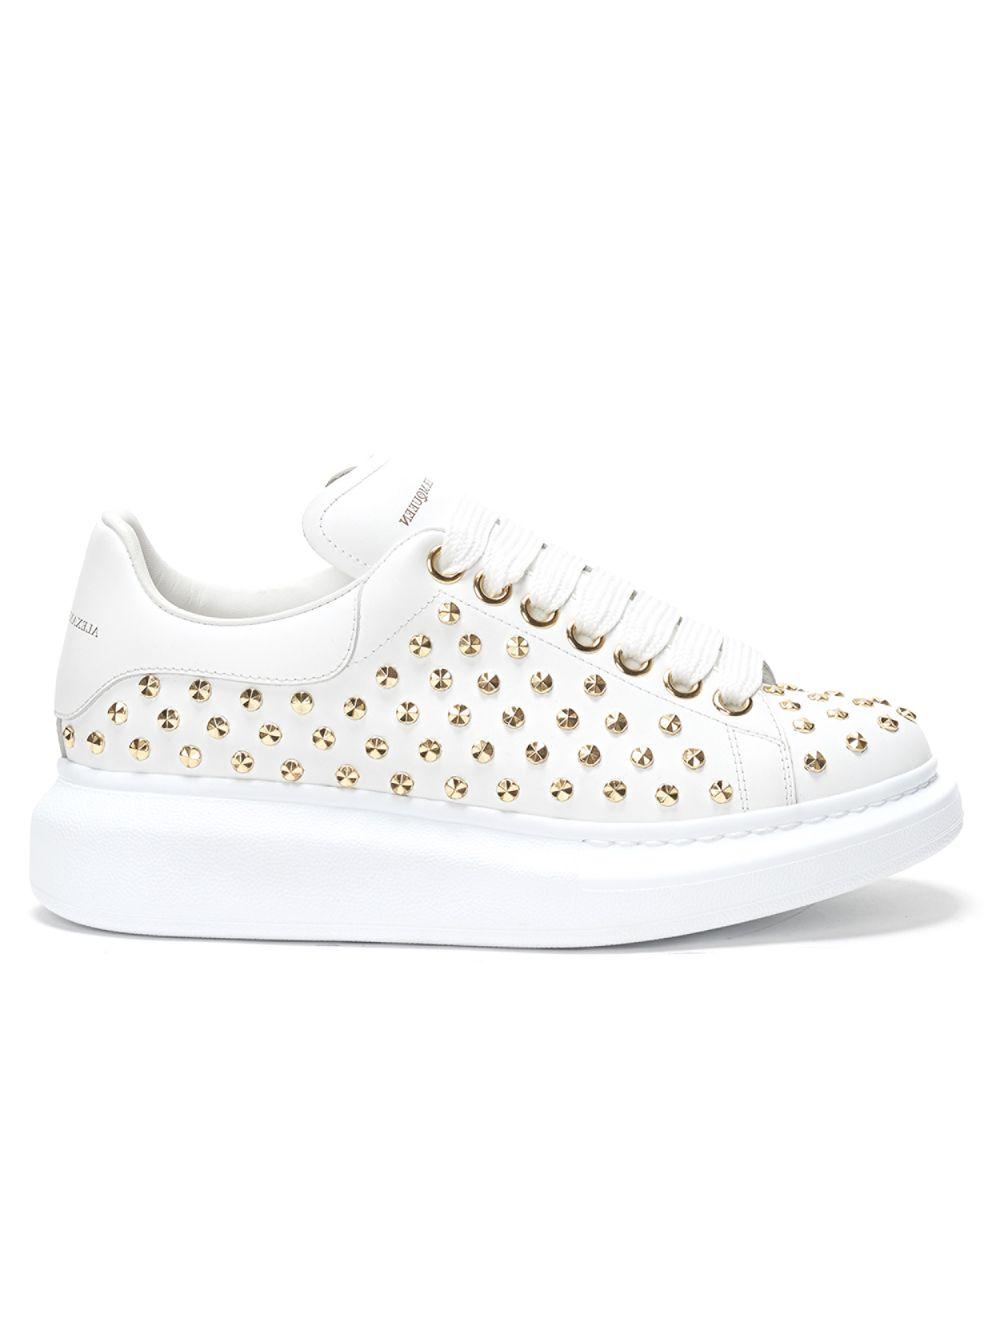 McQueen Spike-studded Leather Platform Sneakers in White - Lyst